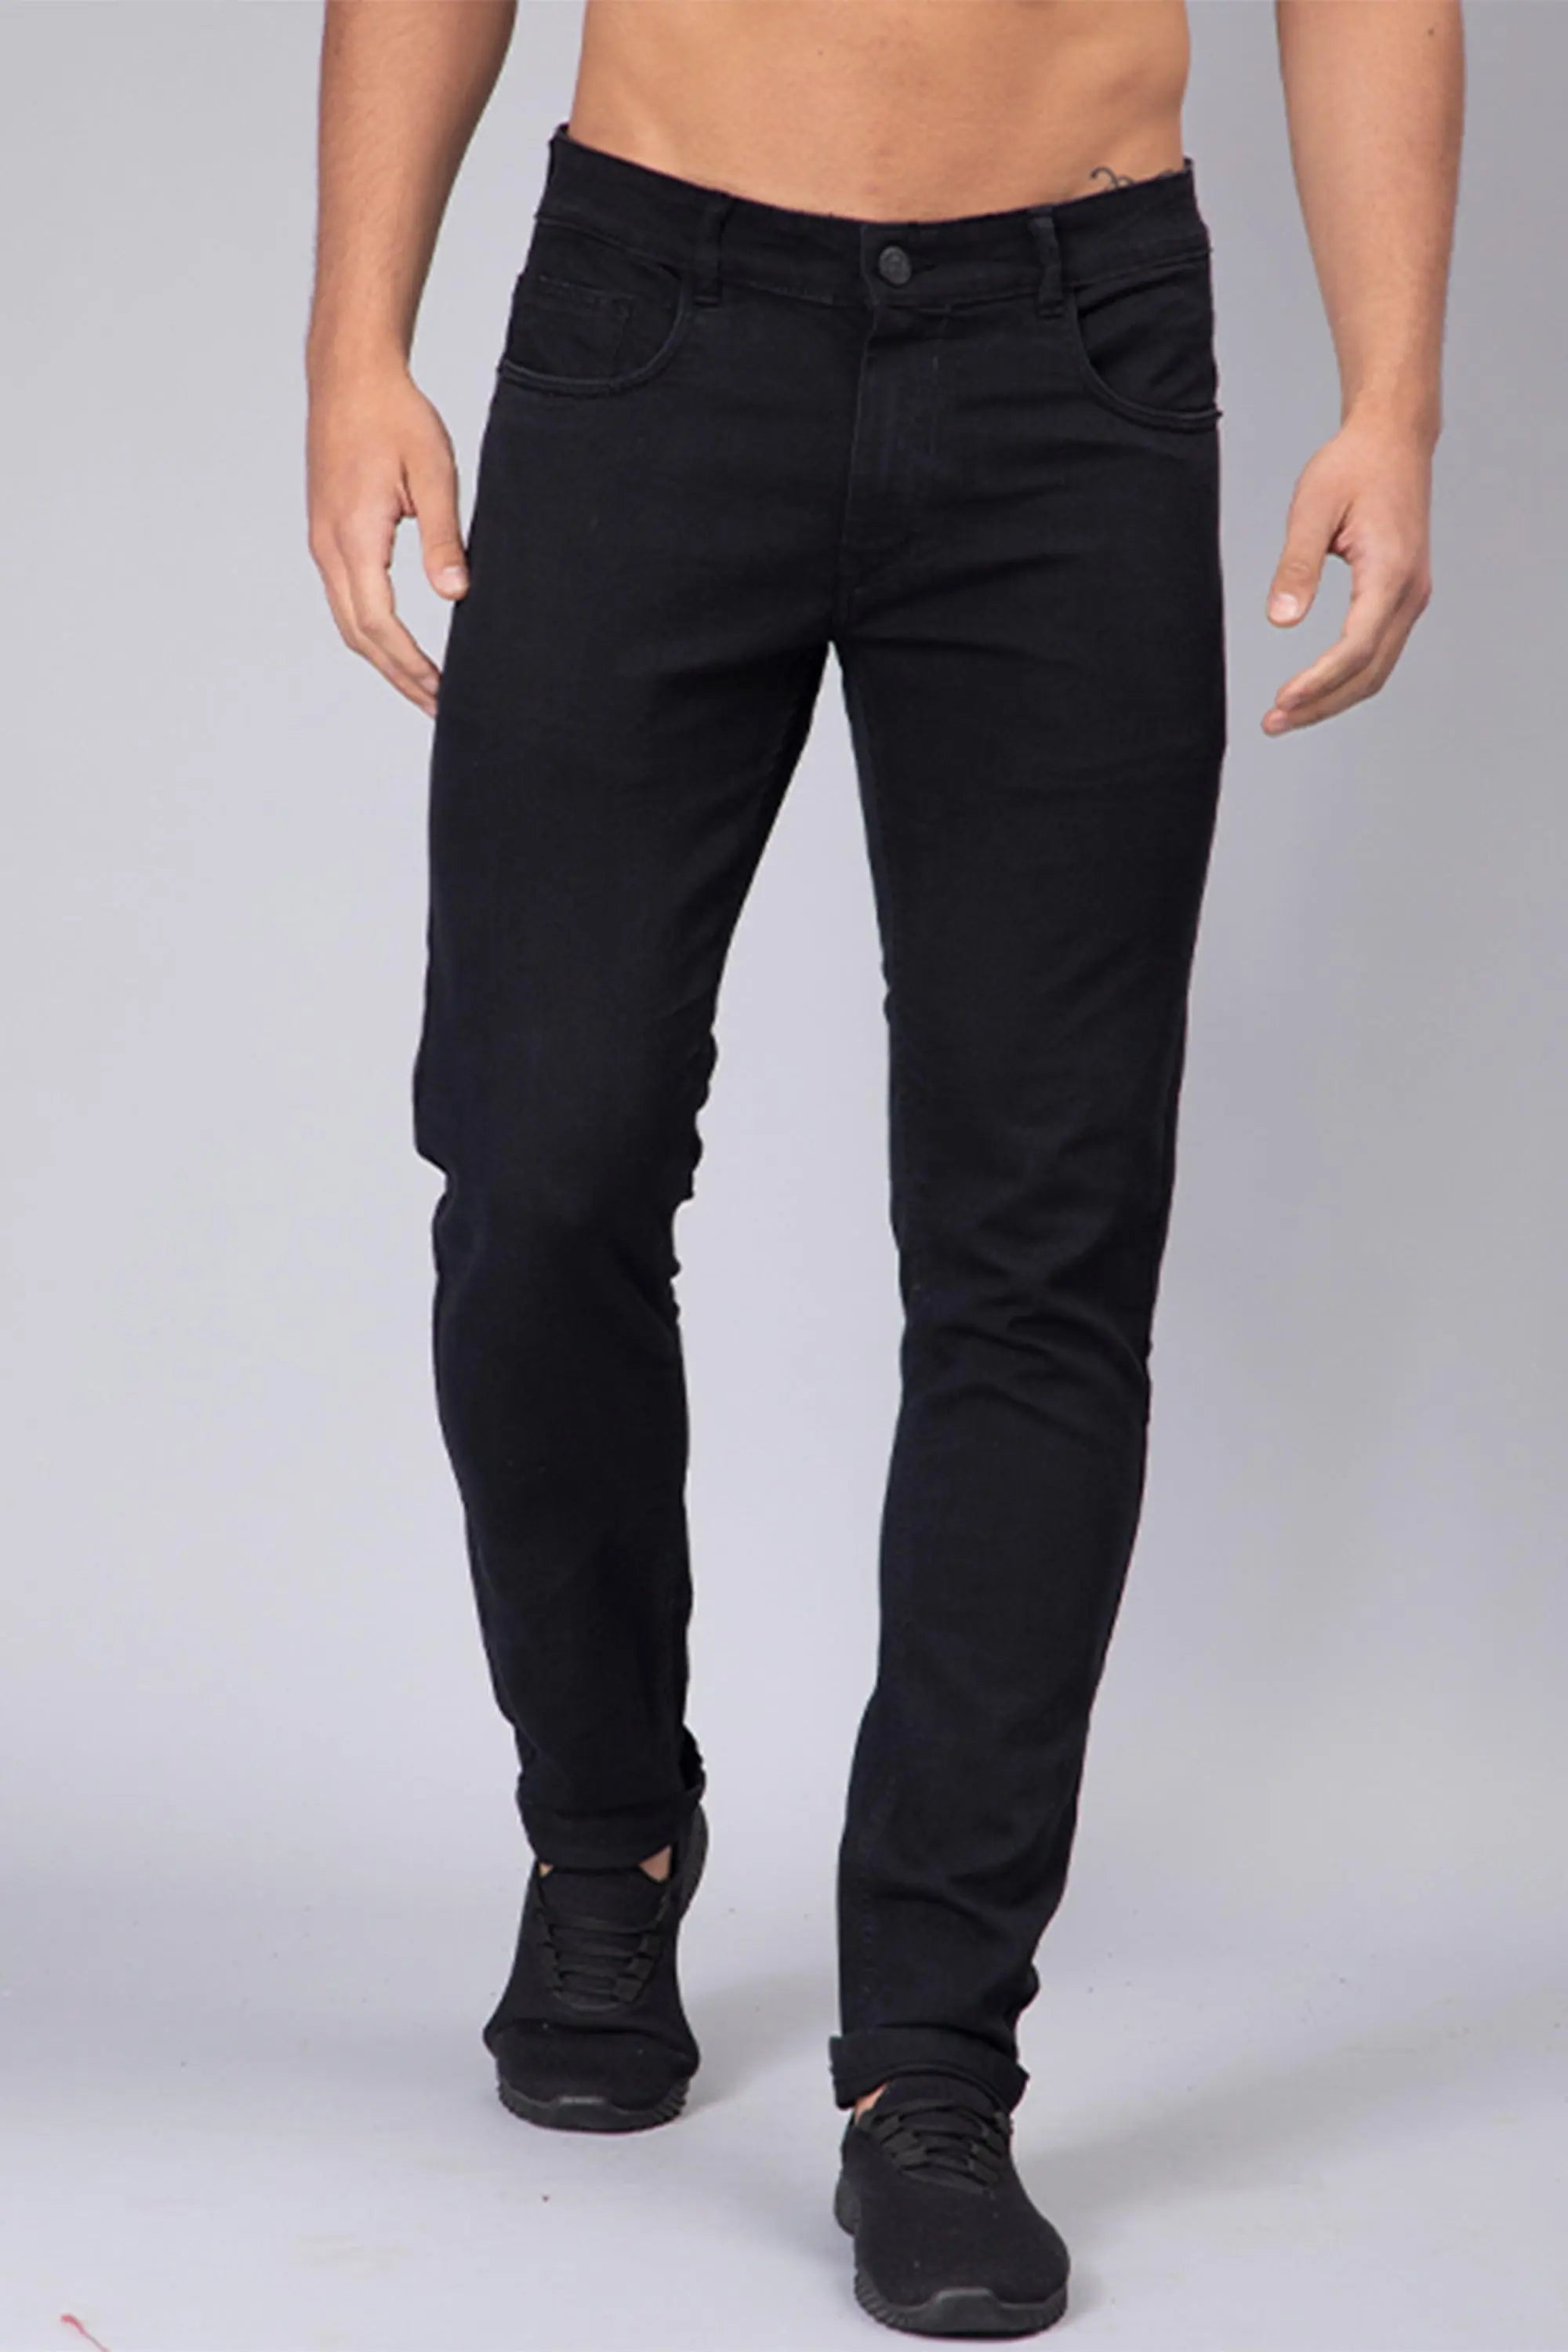 Buy Men's Jeans Online | For Every Day, Every Way - WROGN – Wrogn